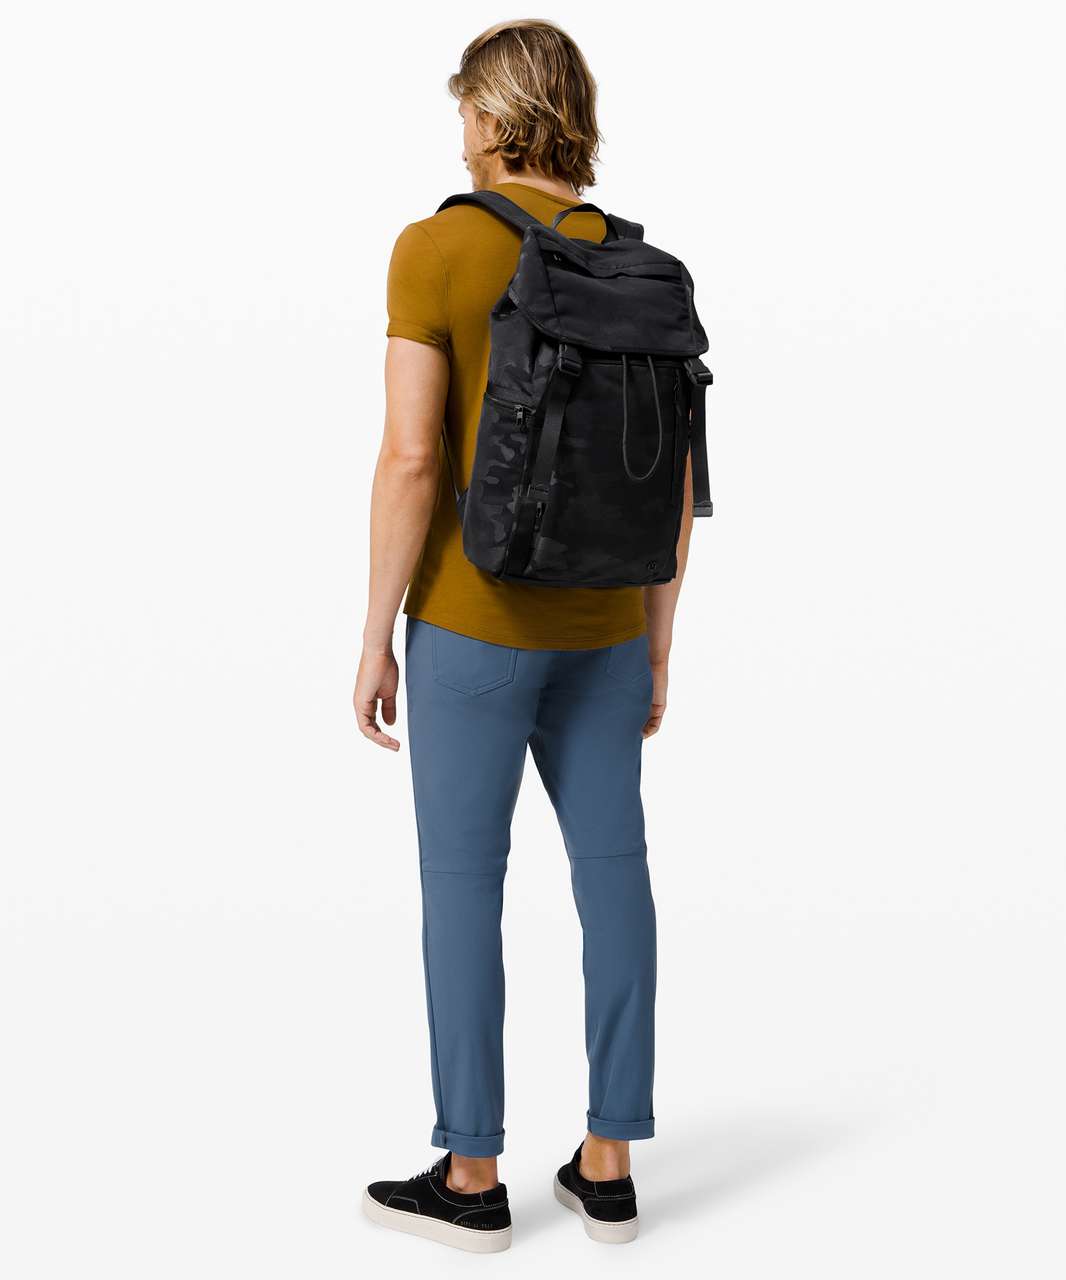 Lululemon Command The Day Backpack *24L - Heritage Camo Jacquard Max Black Graphite Grey